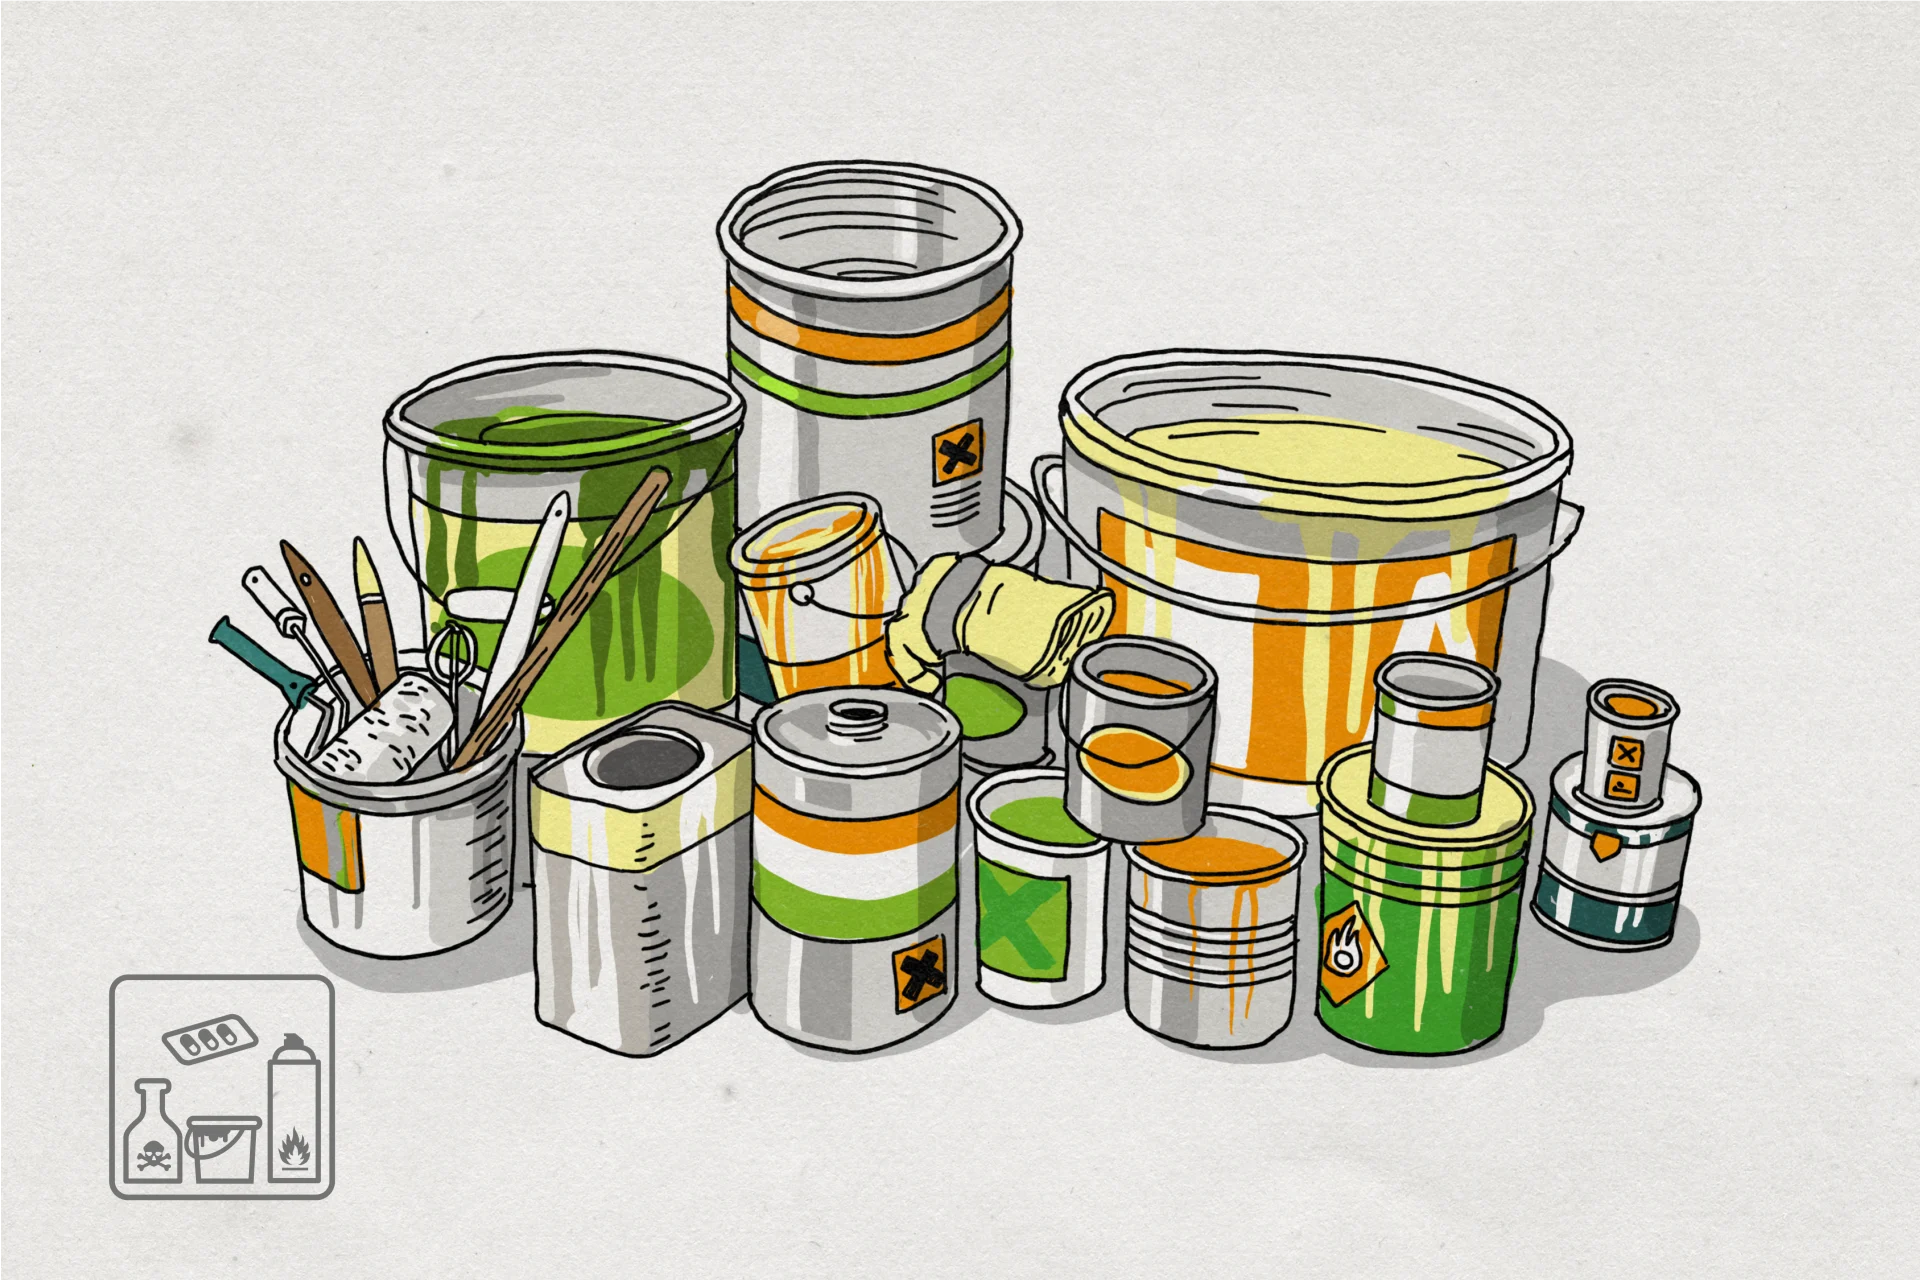 Illustration of used paint buckets, varnishes, cans and chemicals containers.